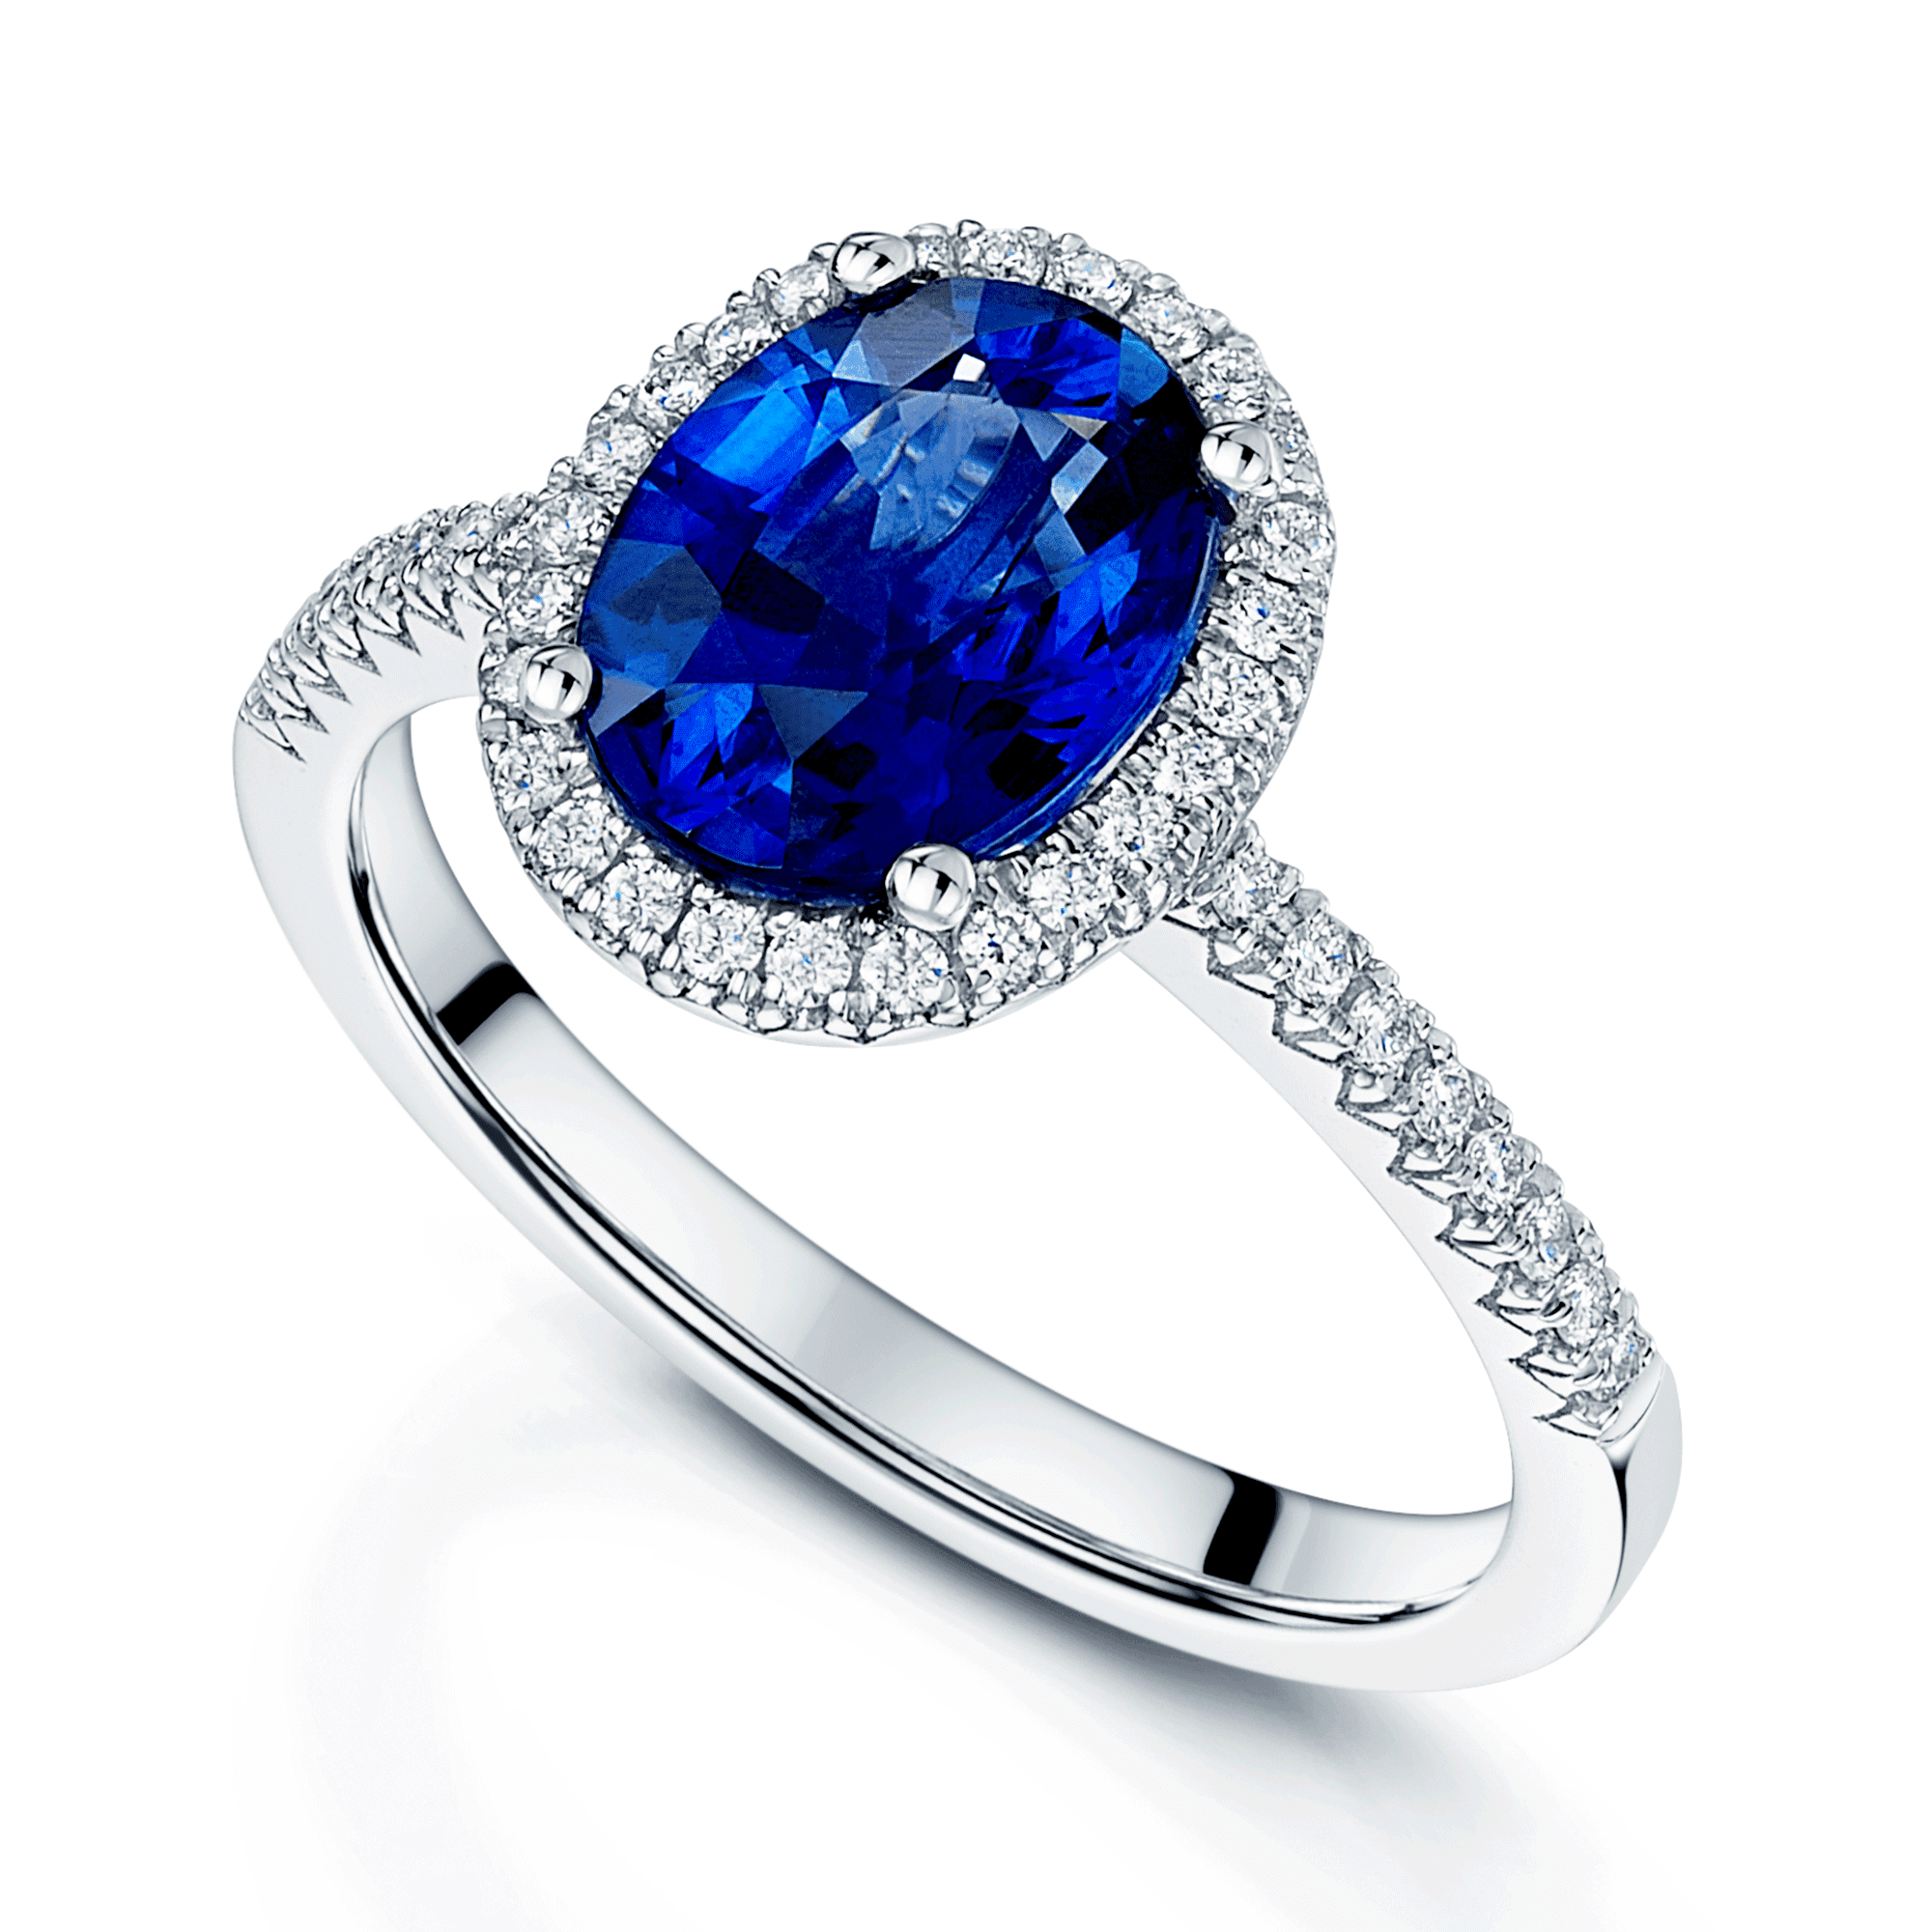 Platinum Oval Sapphire And Diamond Cluster Ring With Diamond Set Shoulders